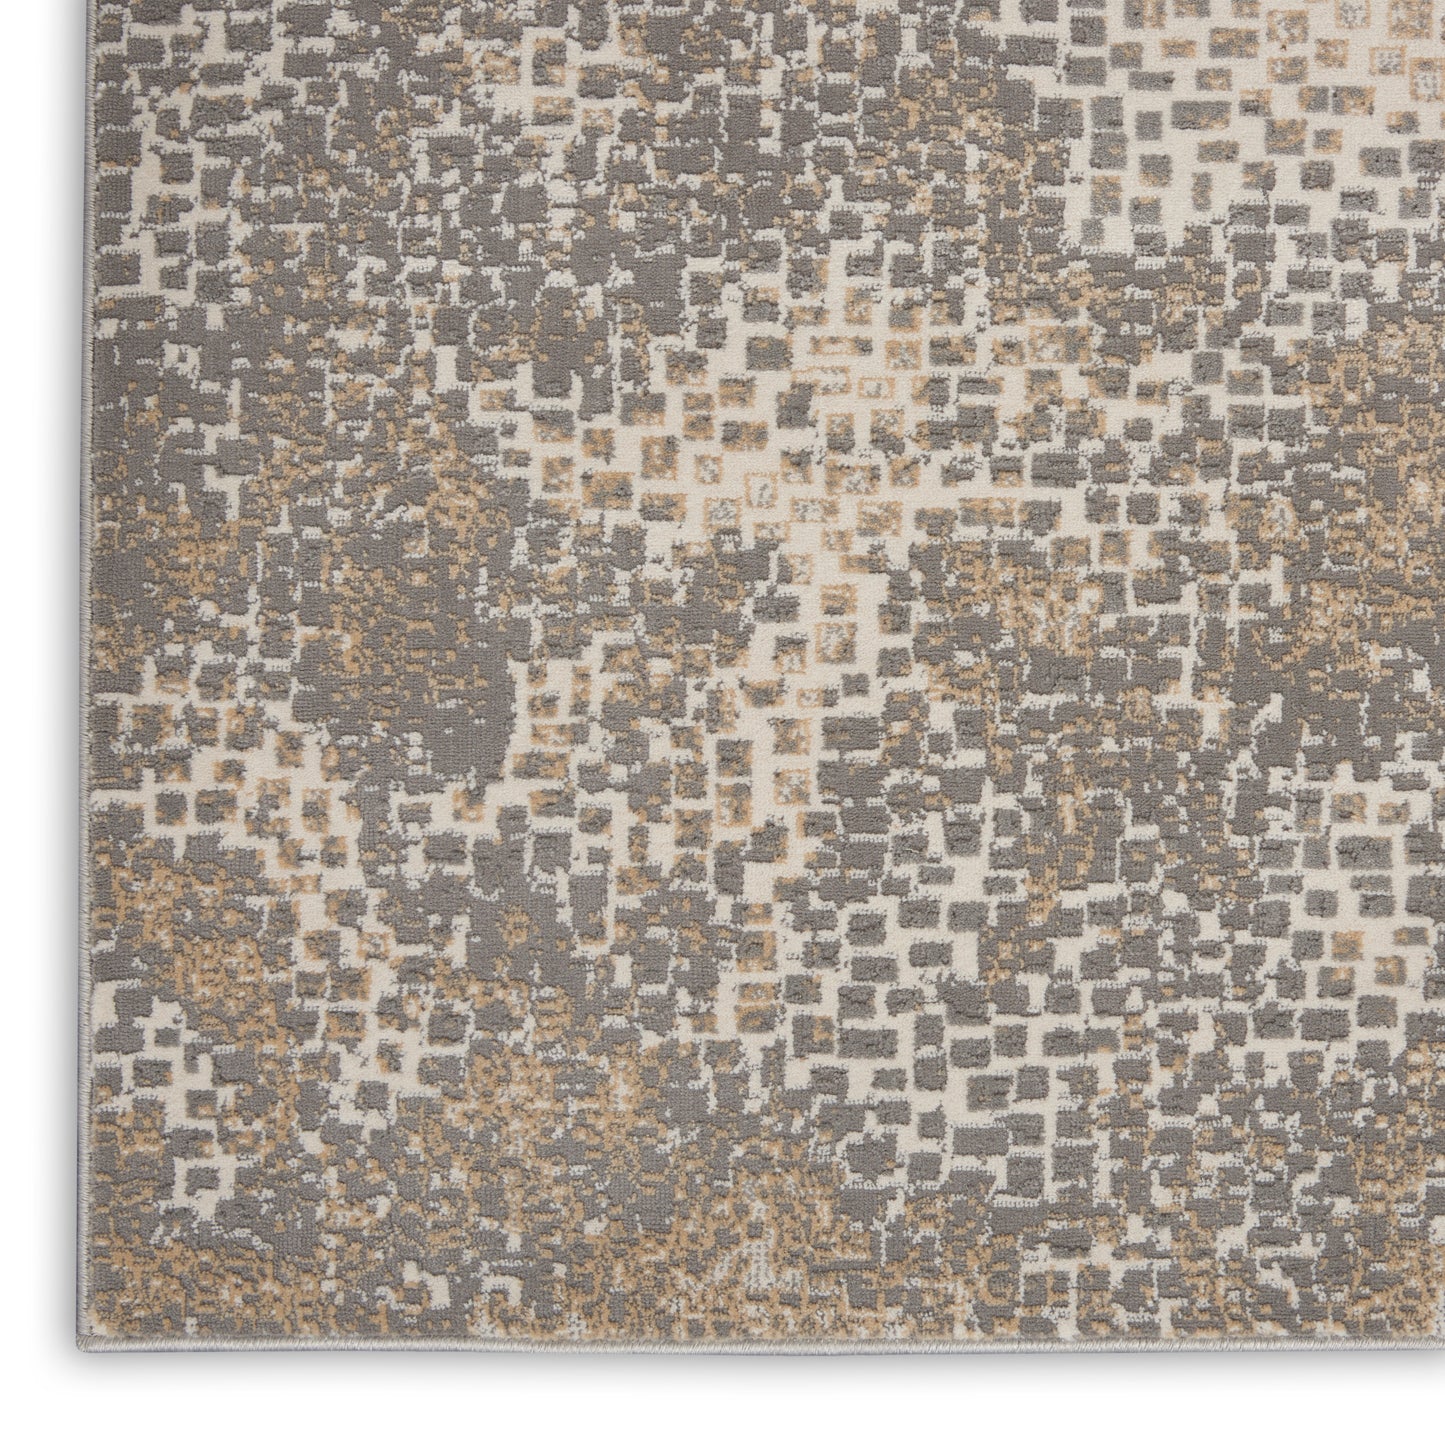 Michael Amini MA90 Uptown UPT02 Beige Grey  Contemporary Machinemade Rug